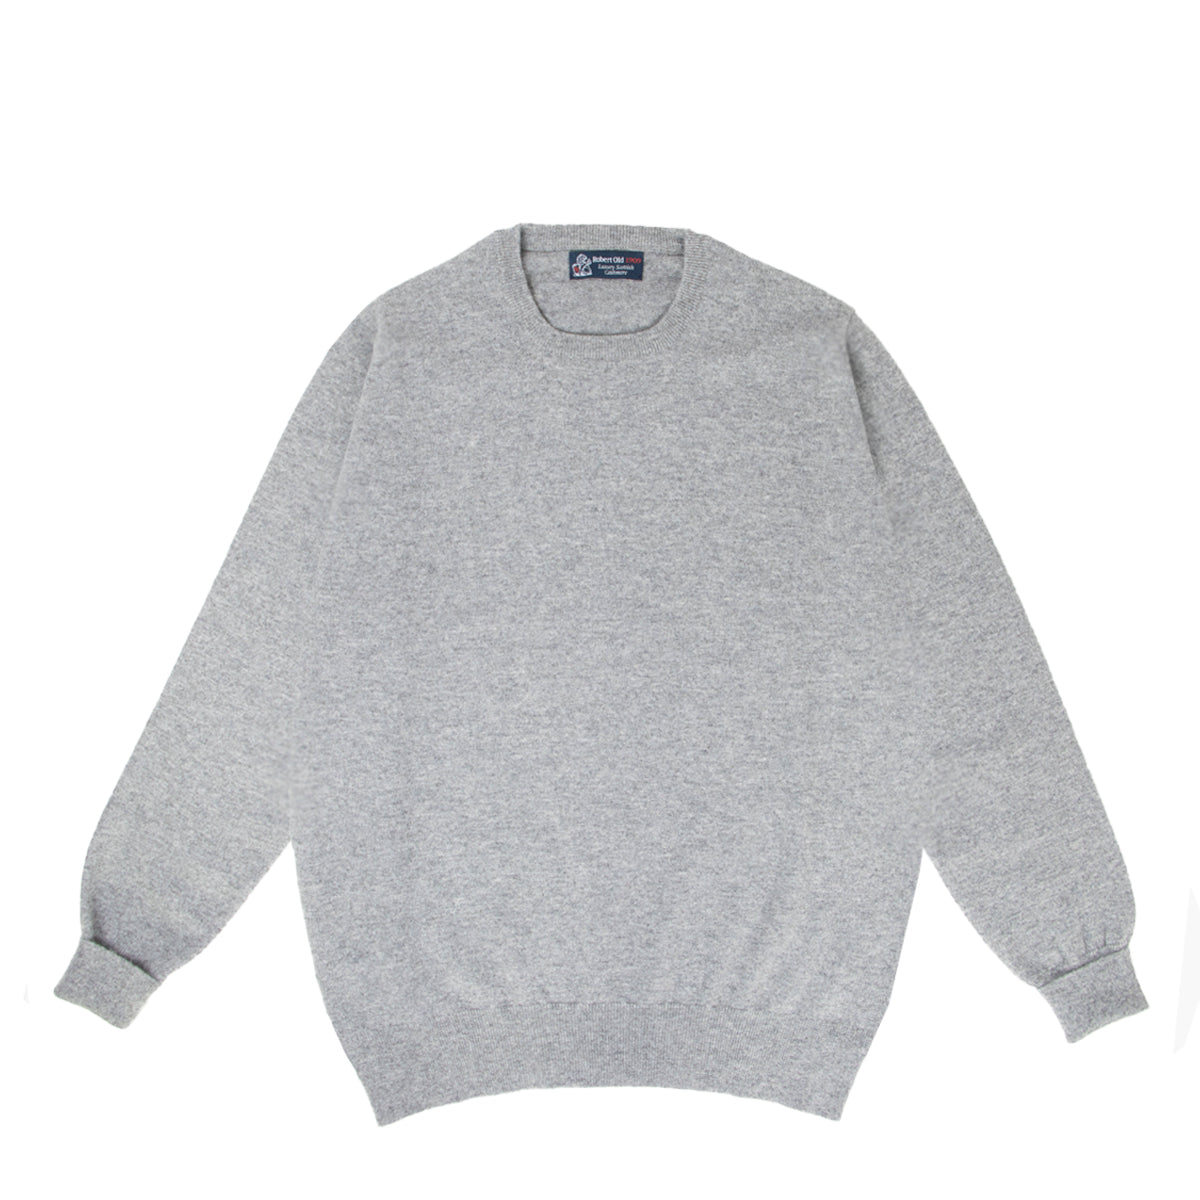 Flannel Highclere Cashmere Crew Neck Sweater  Robert Old   